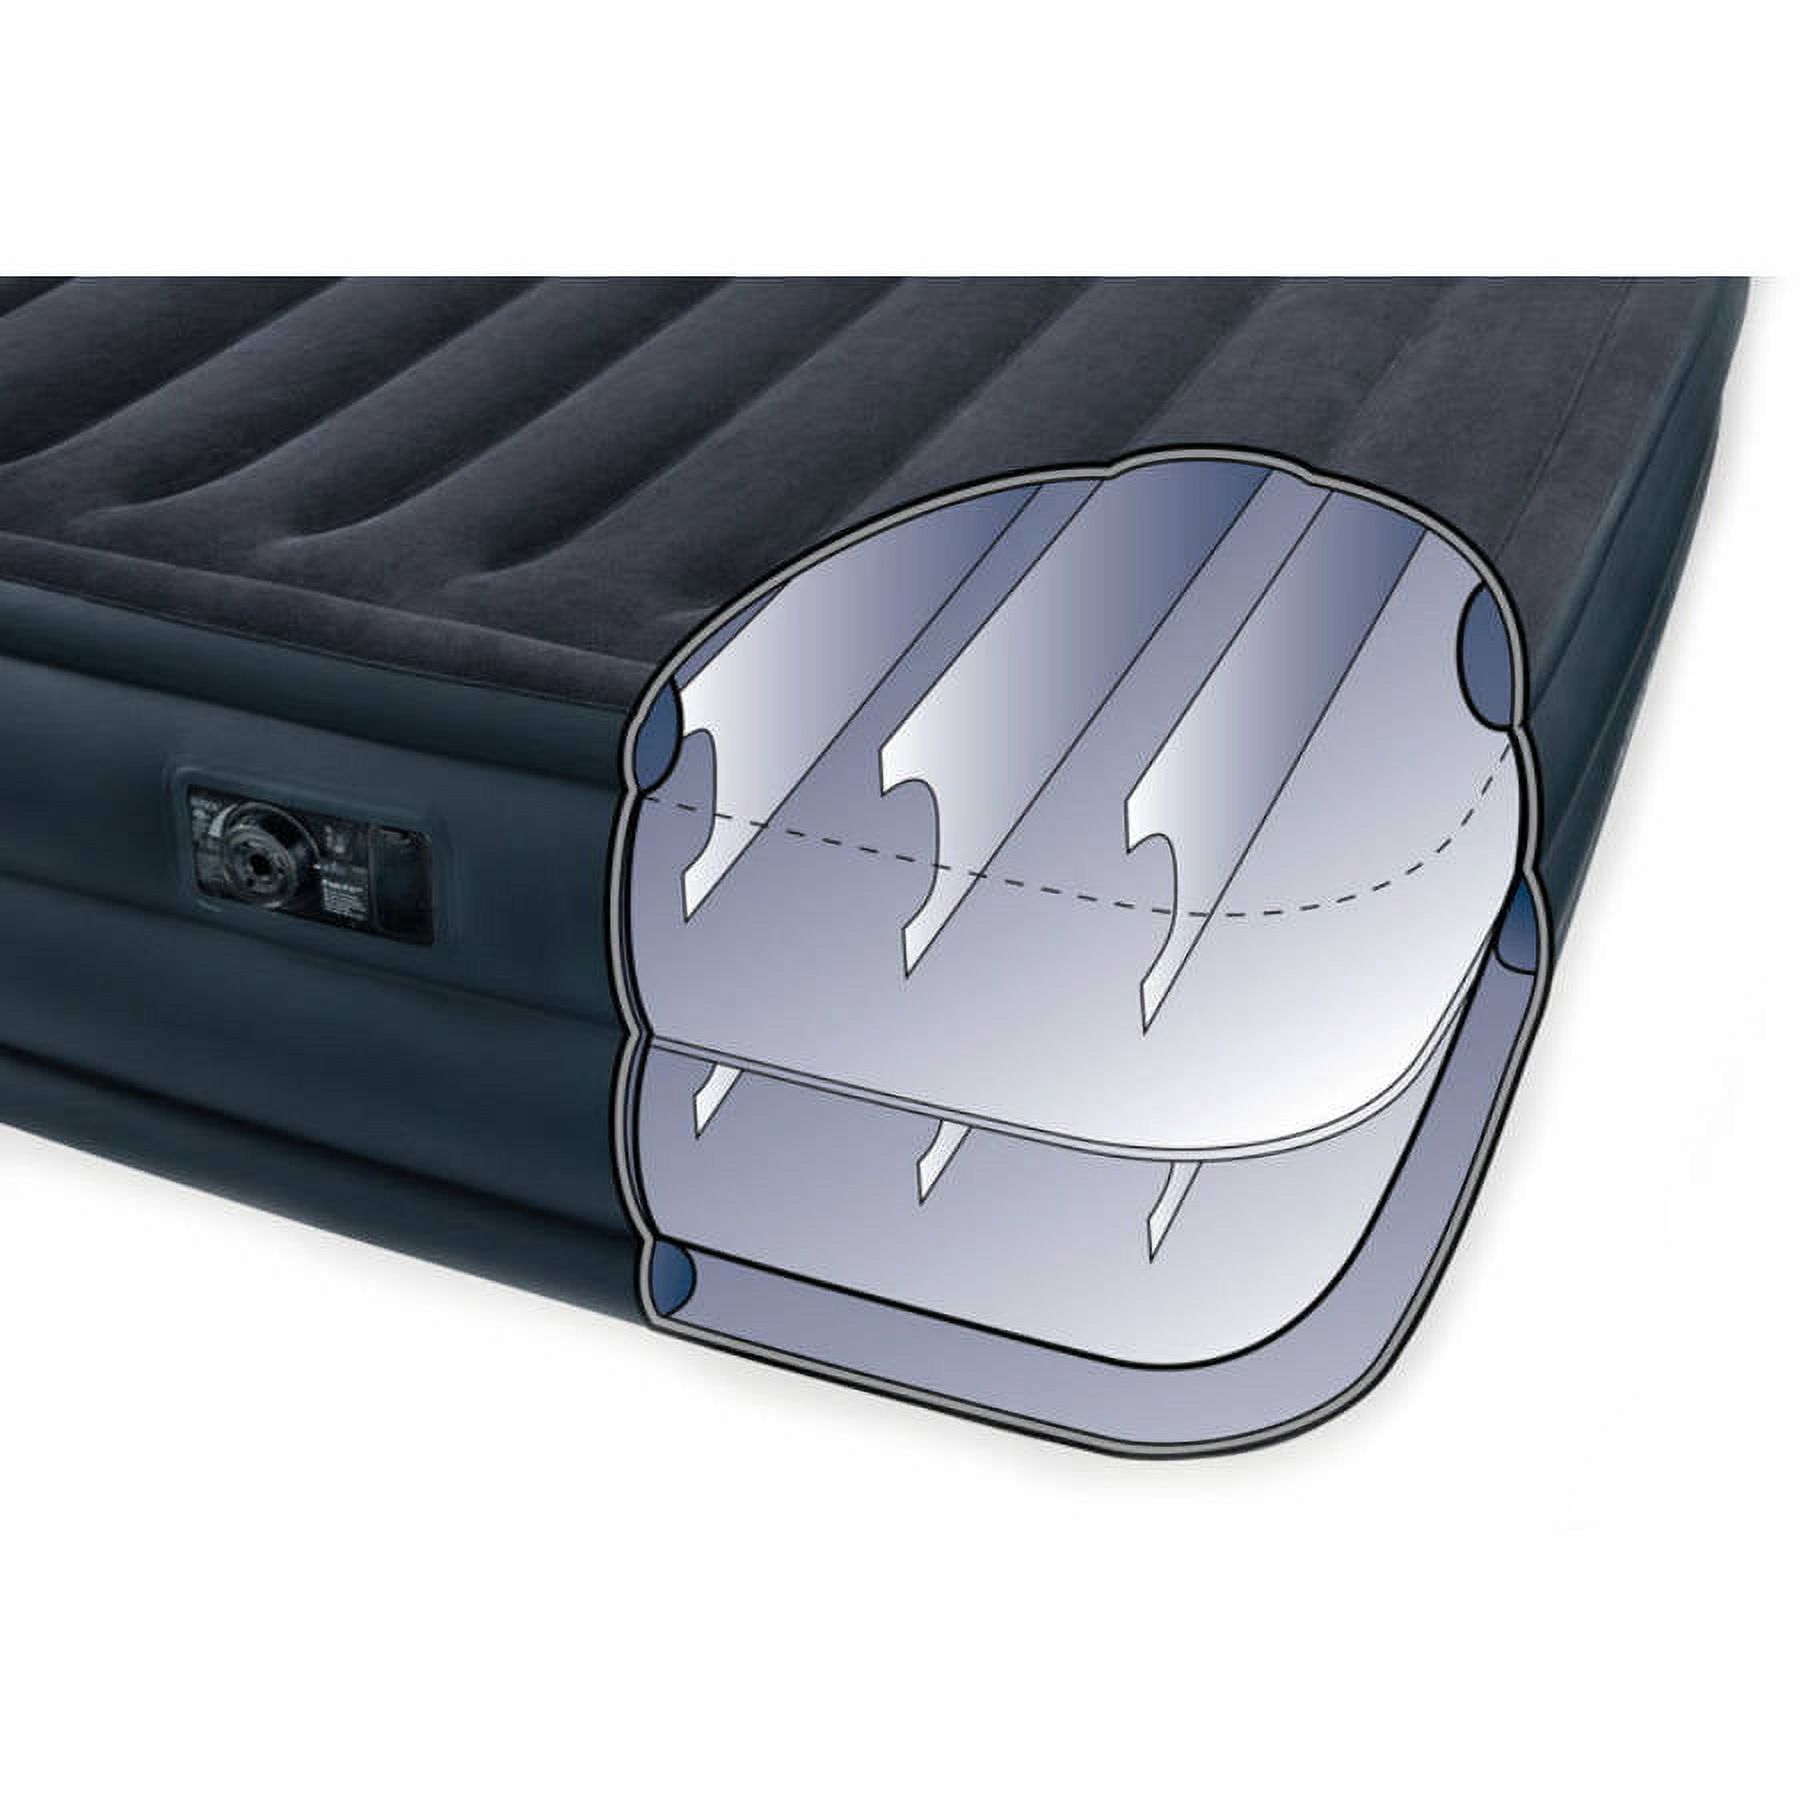 Intex Queen 22" Raised Downy Airbed Mattress with Built-in Electric Pump - image 3 of 8